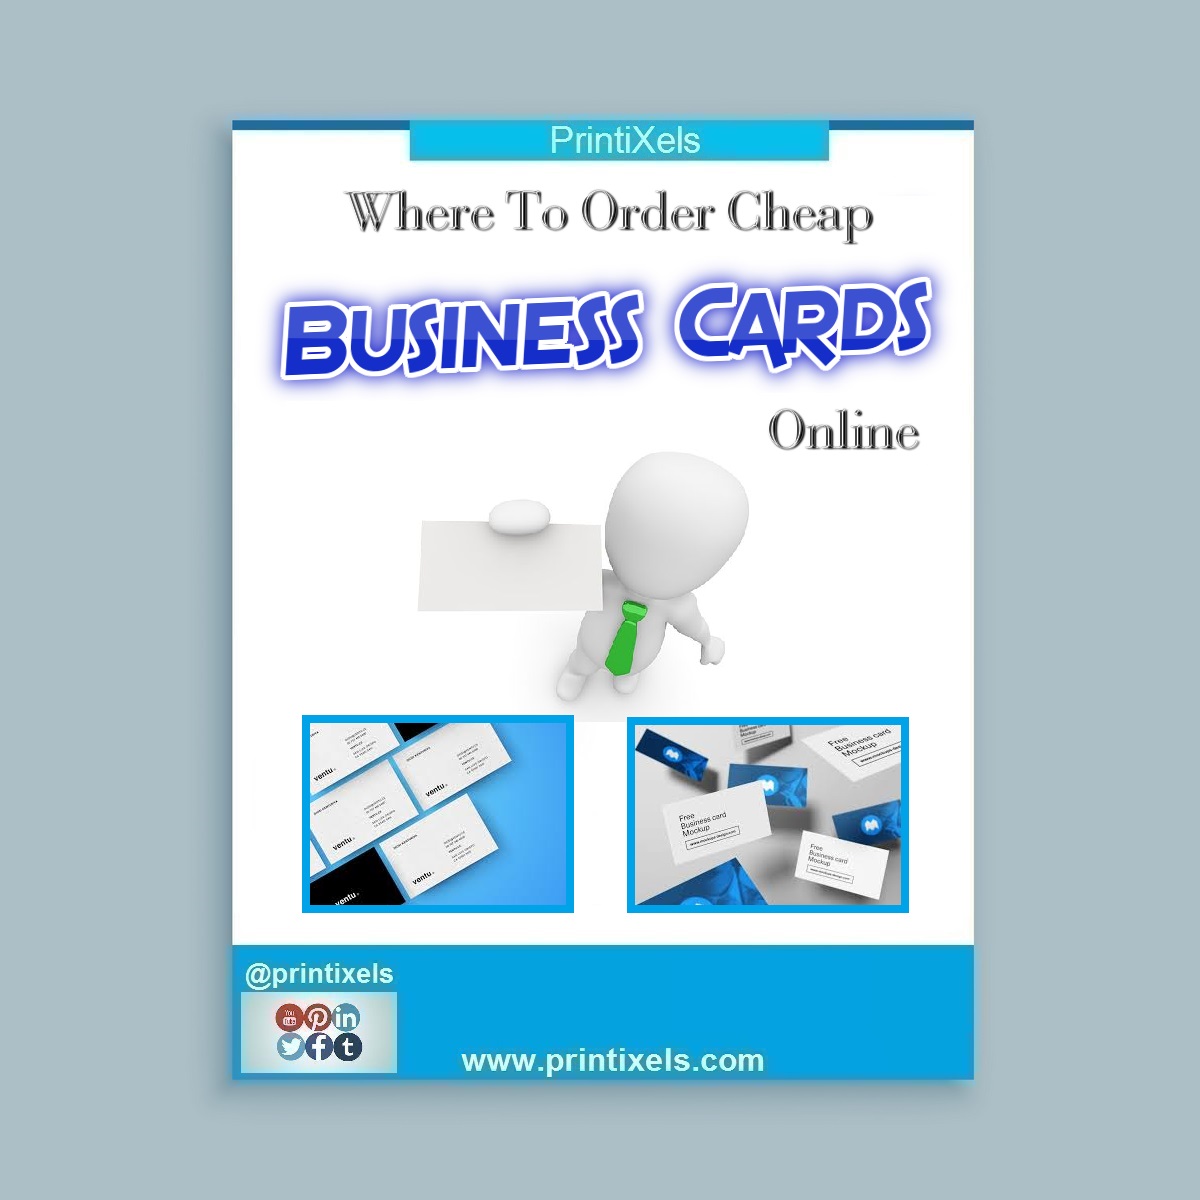 Where To Order Cheap Business Cards Online